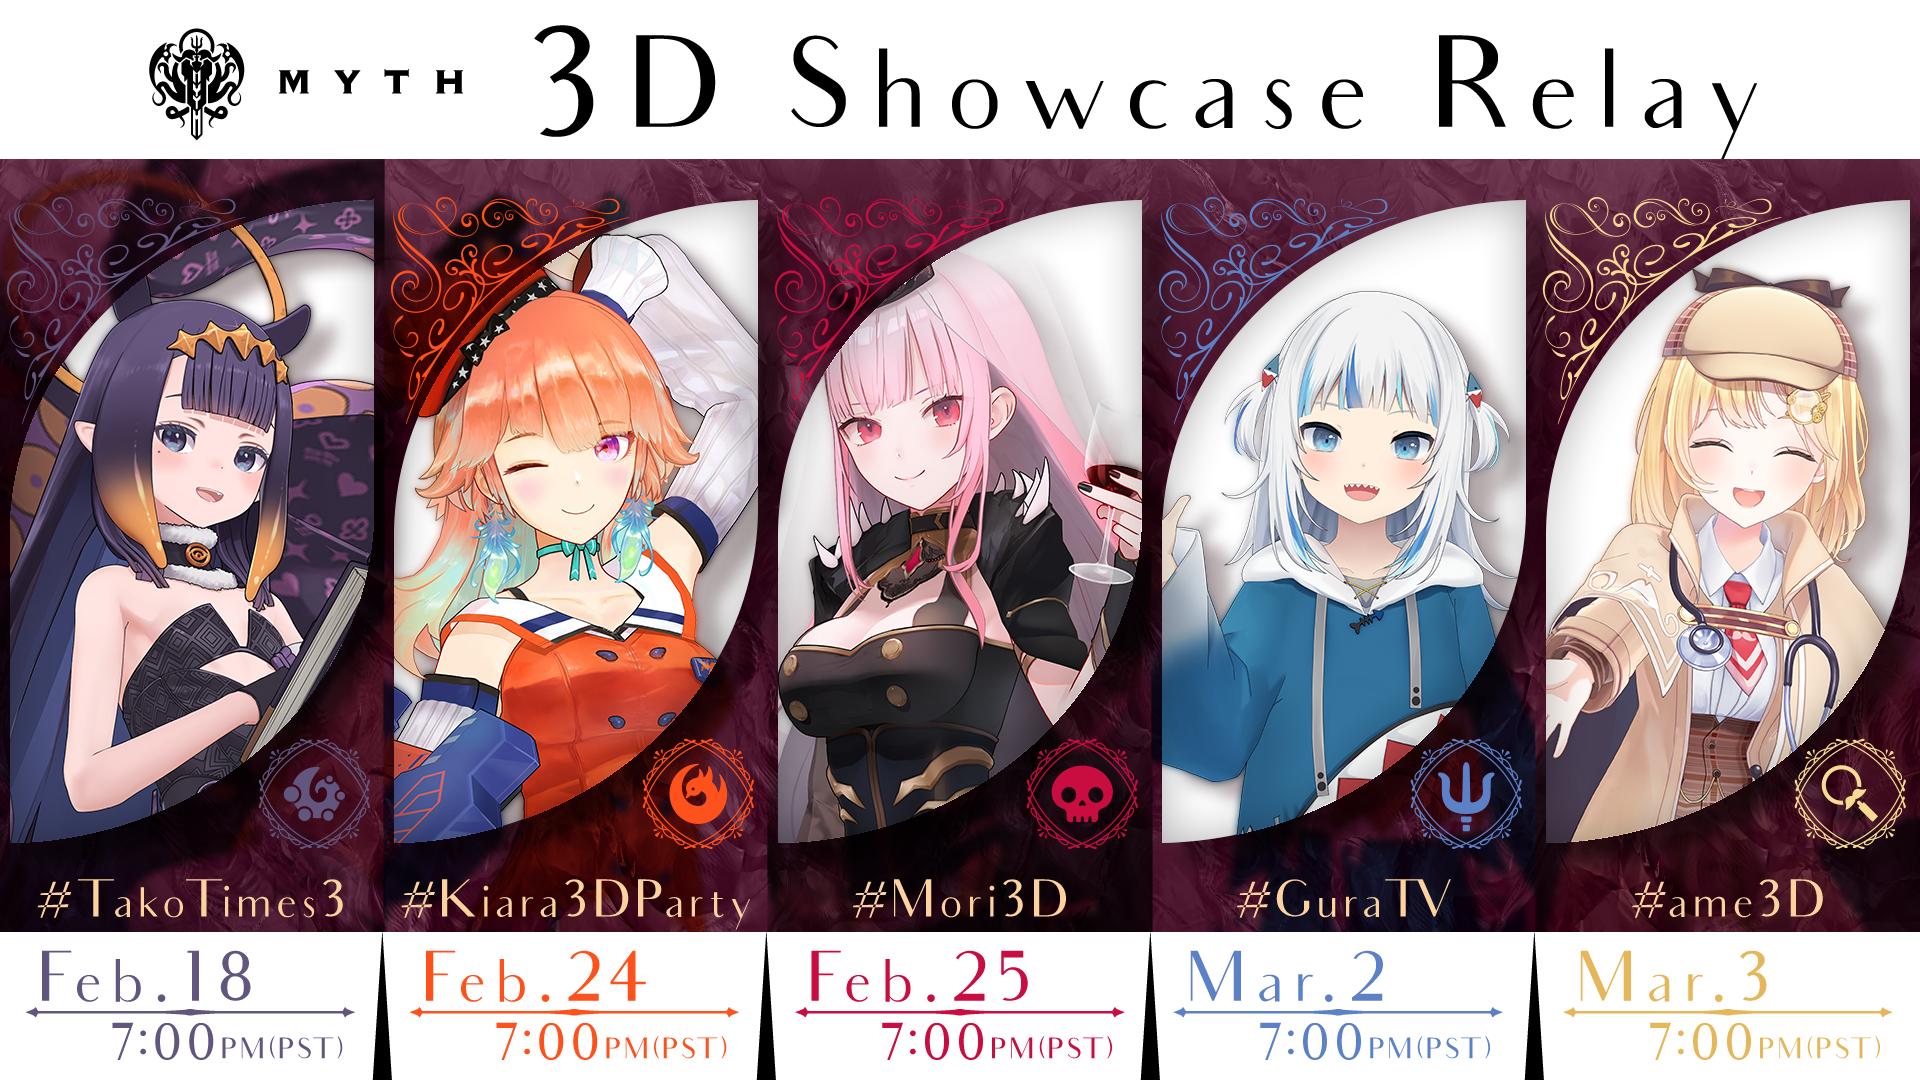 hololive English -Myth- to Hold 3D Model Showcase Relay